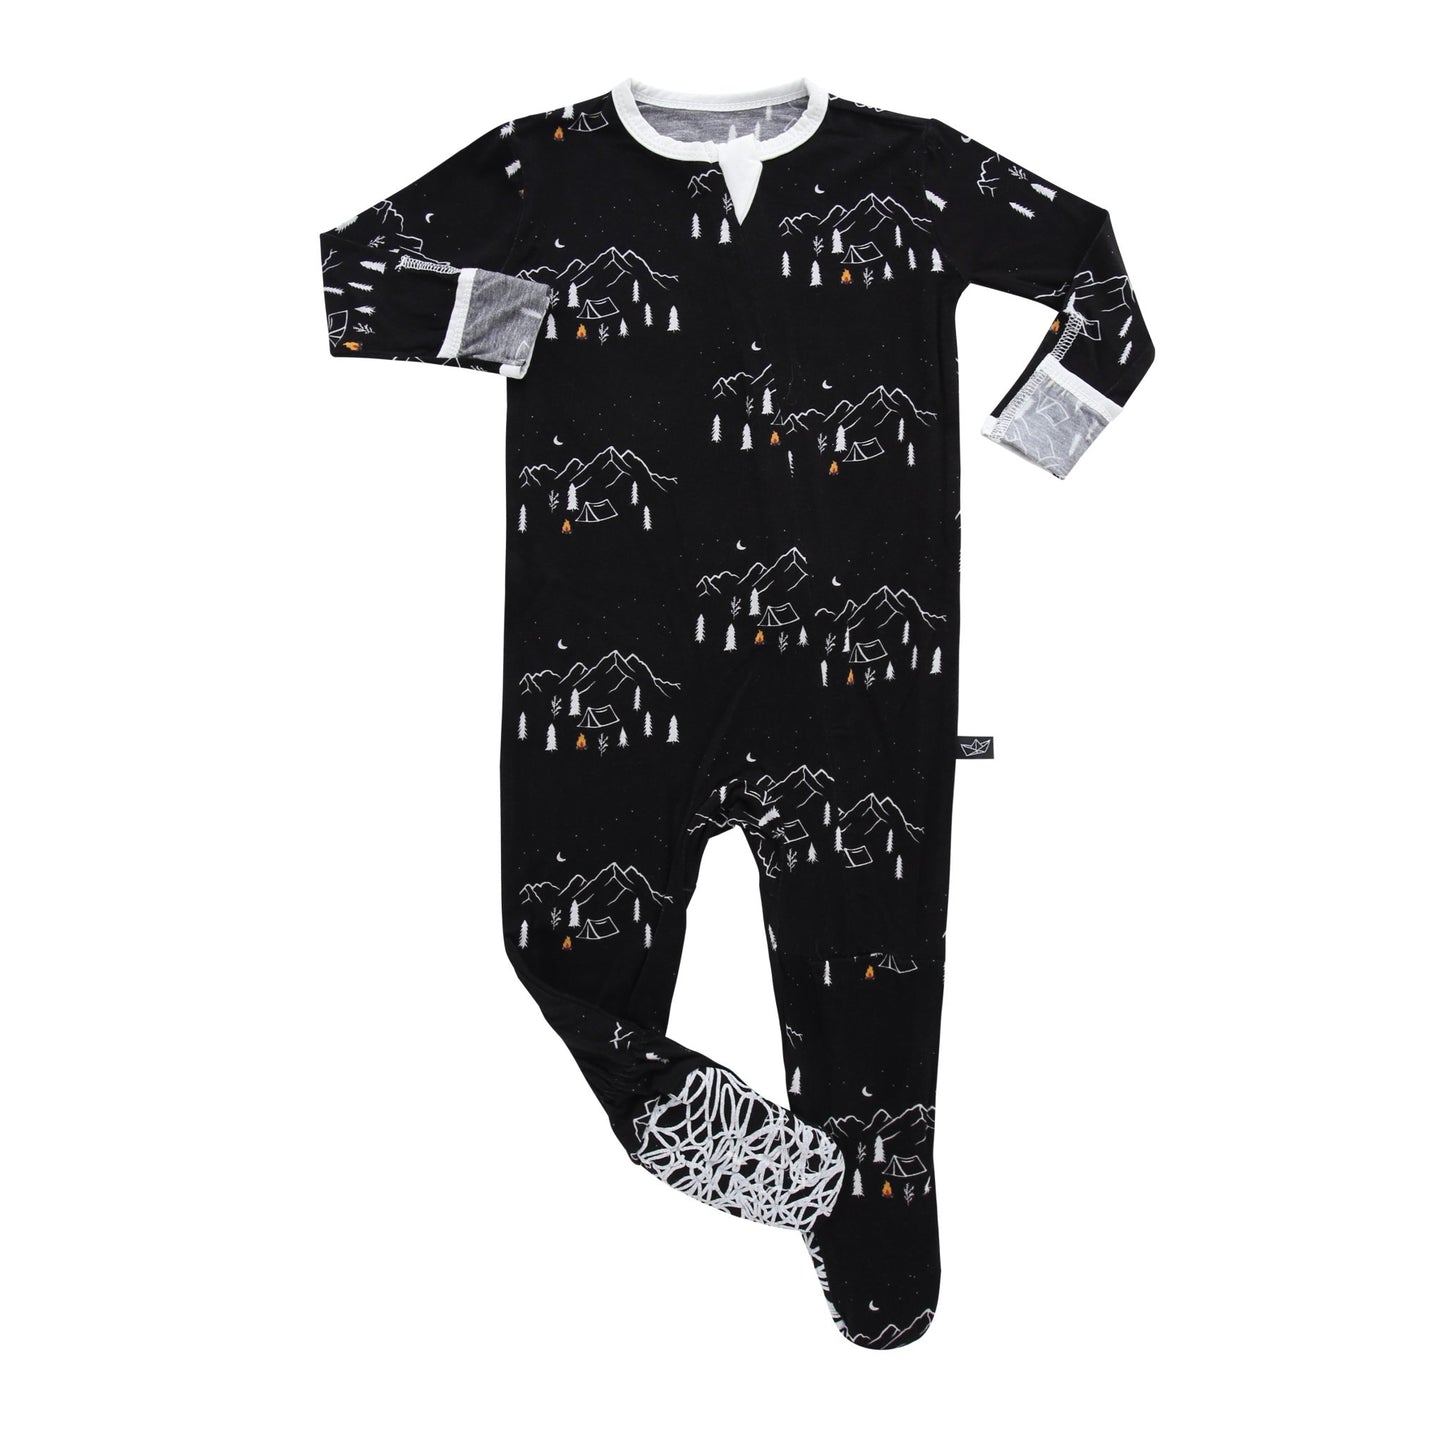 Midnight Camping Bamboo Footed Sleeper - Peregrine Kidswear - Clothing - 0-3M